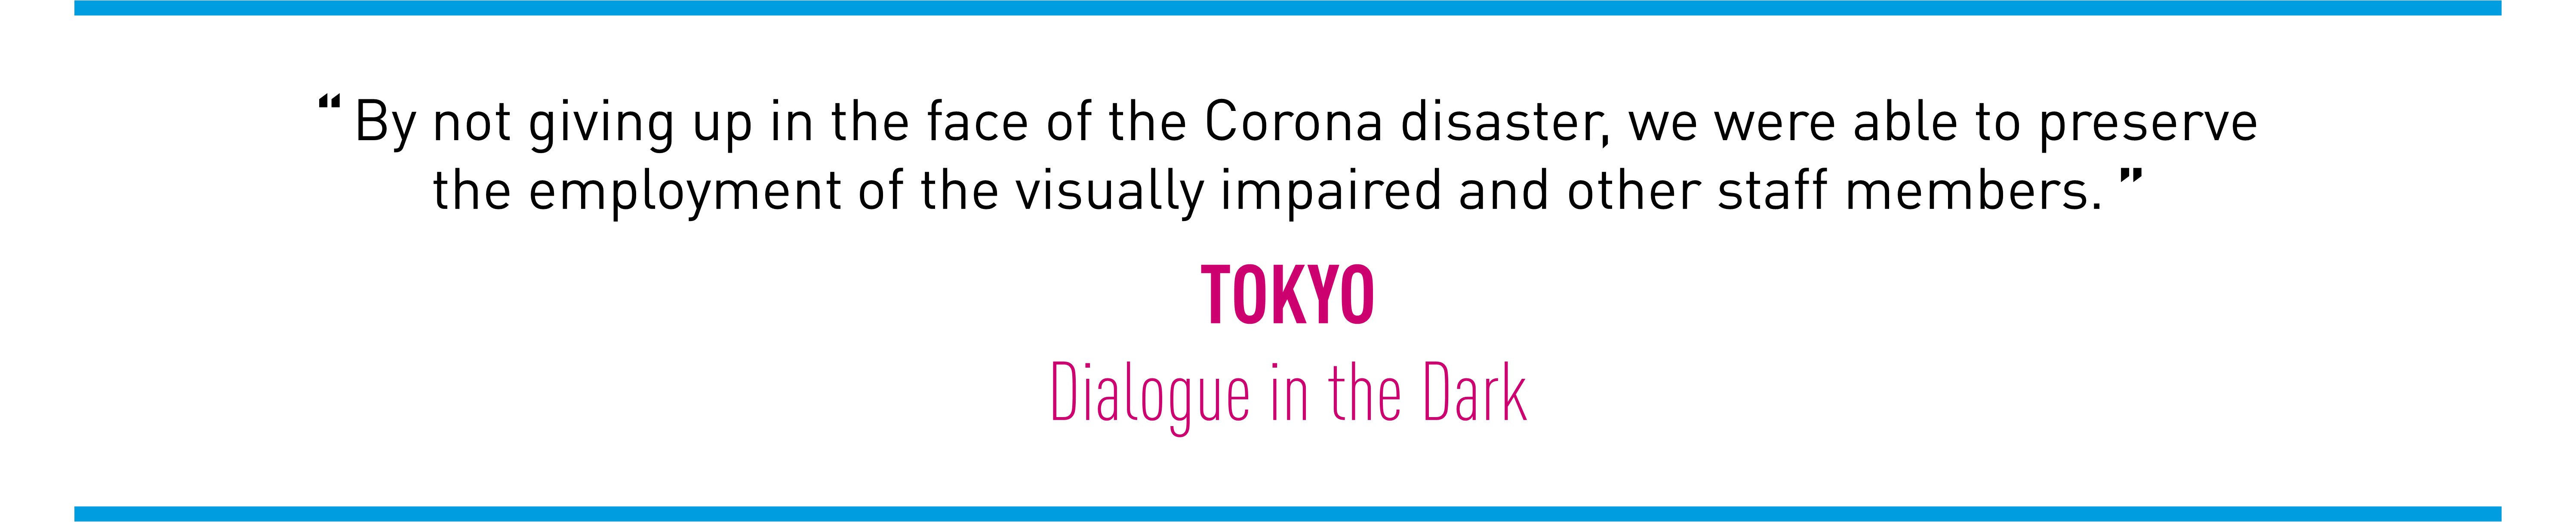 By not giving up in the face of the Corona disaster, we were able to preservethe employment of the visually impaired and other staff members. TOKYO (Dialogue in the Dark)